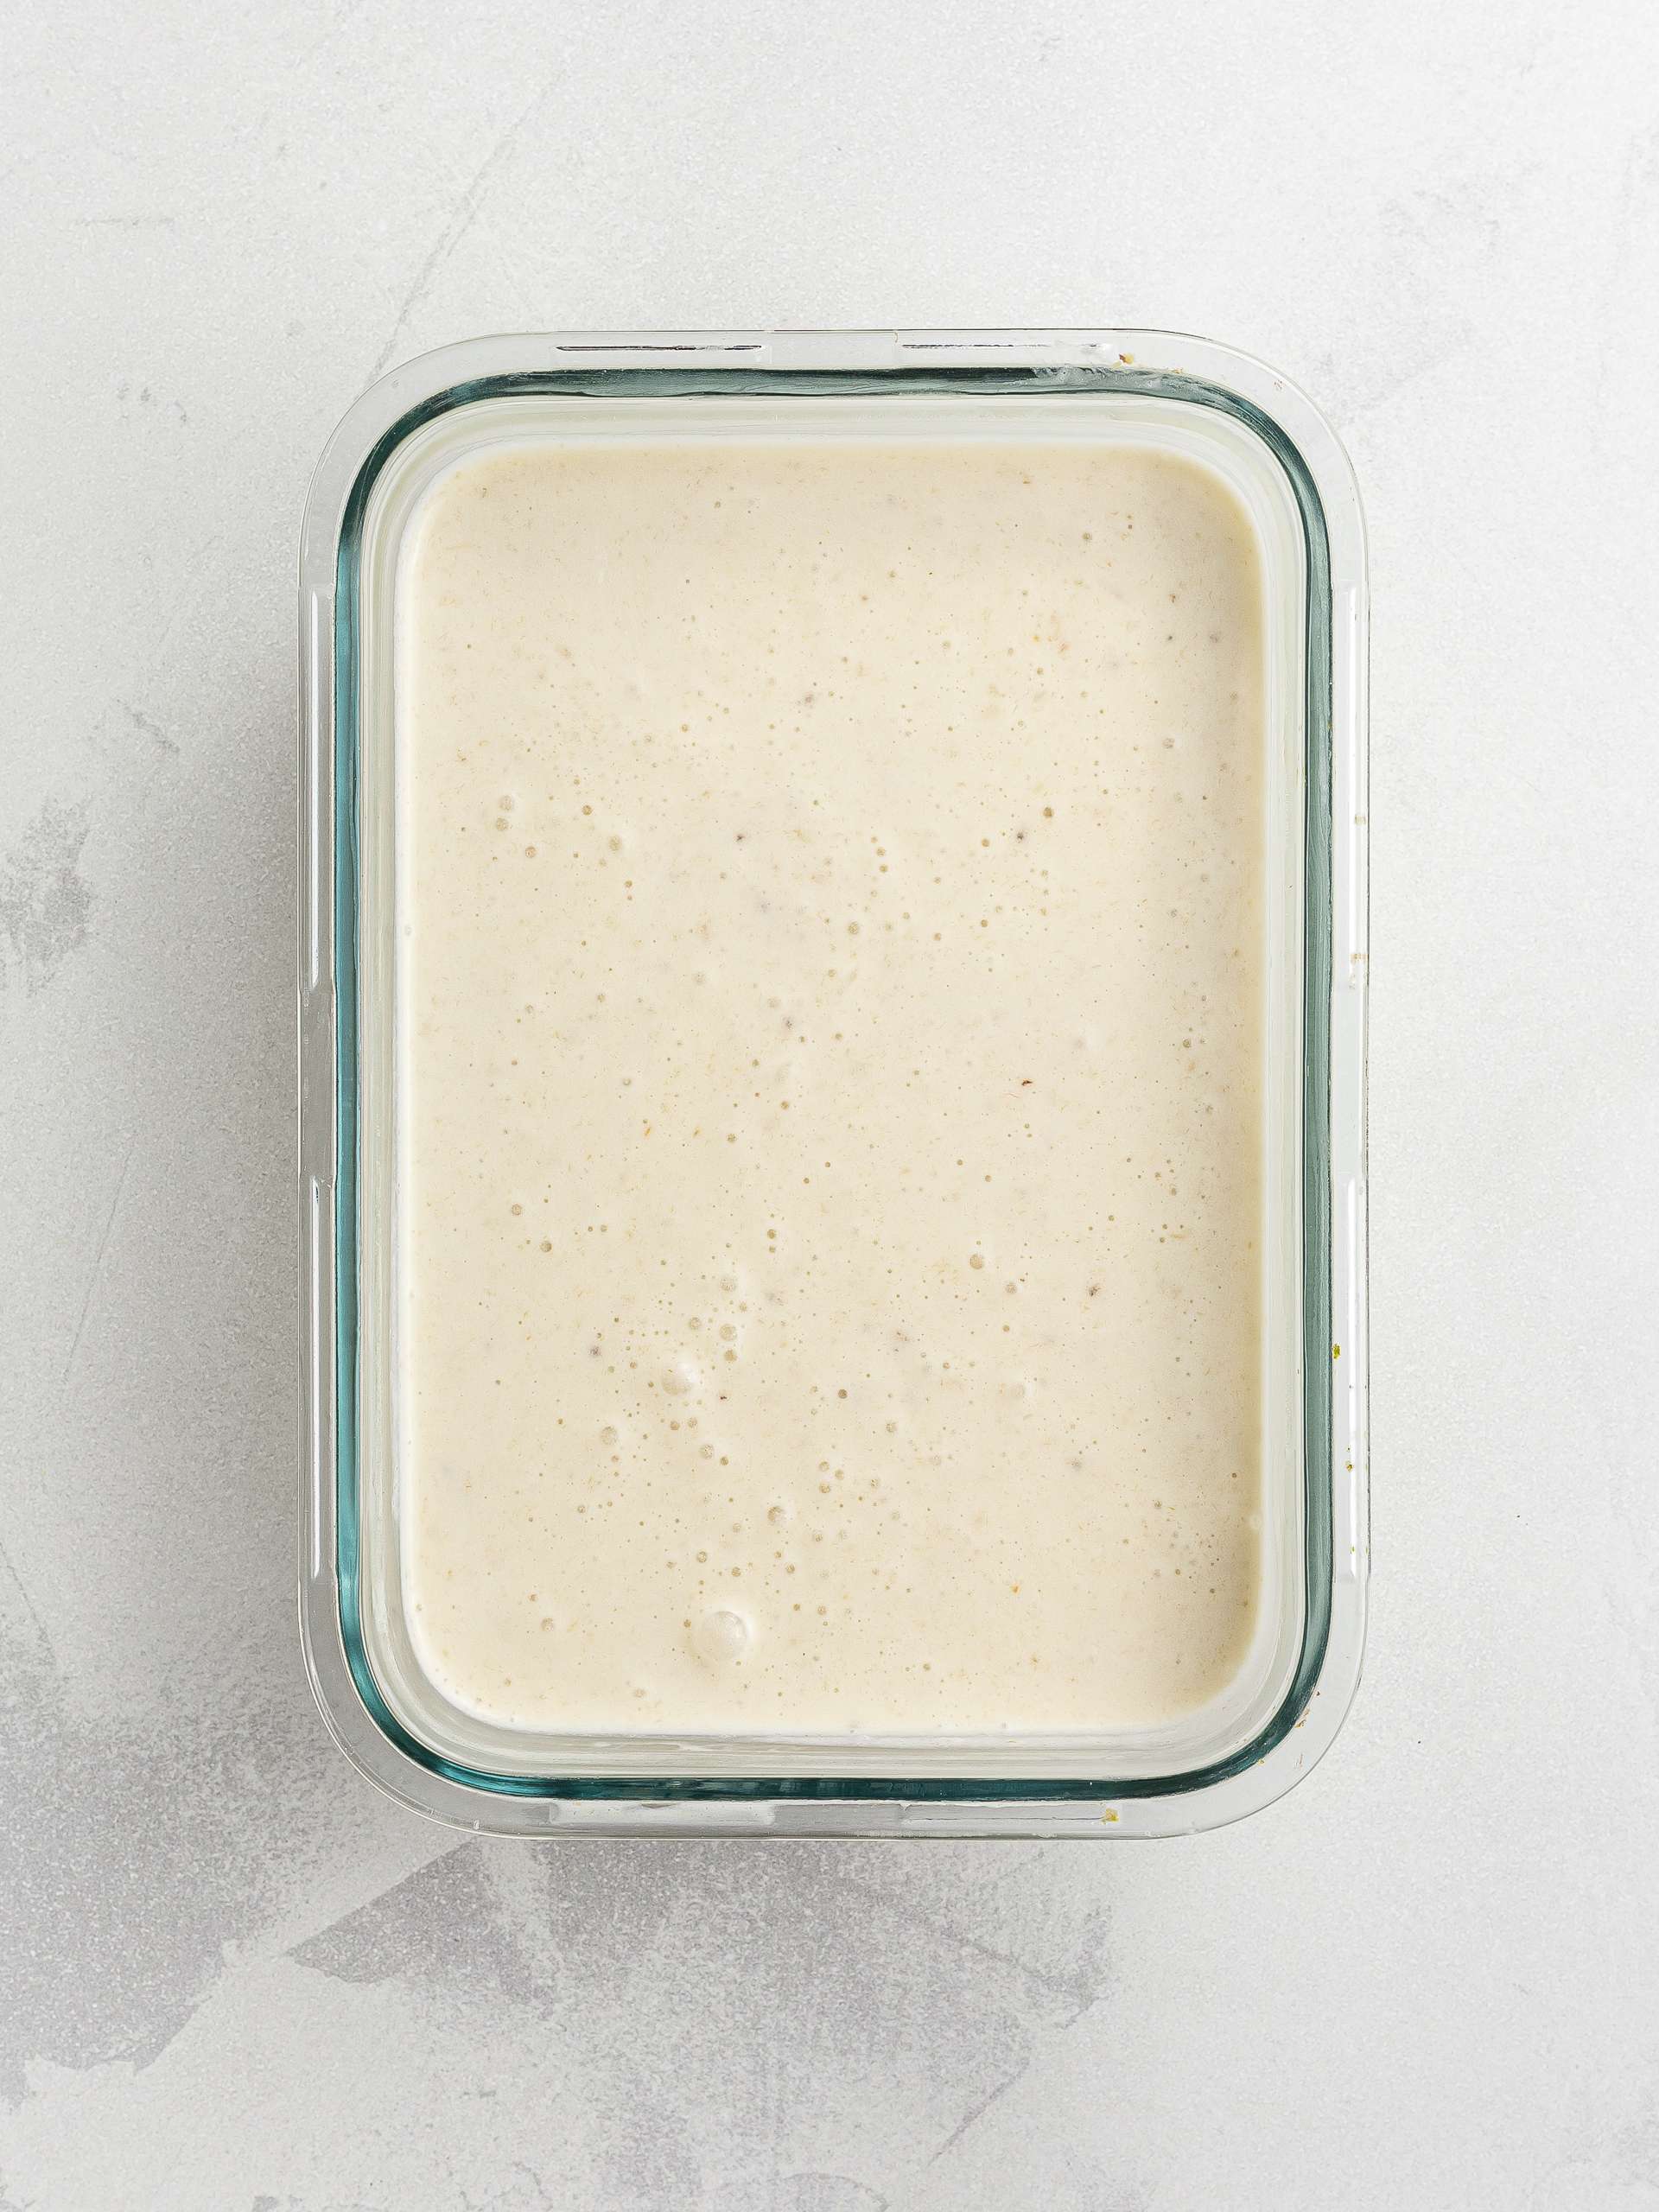 banana coconut ice cream in a container